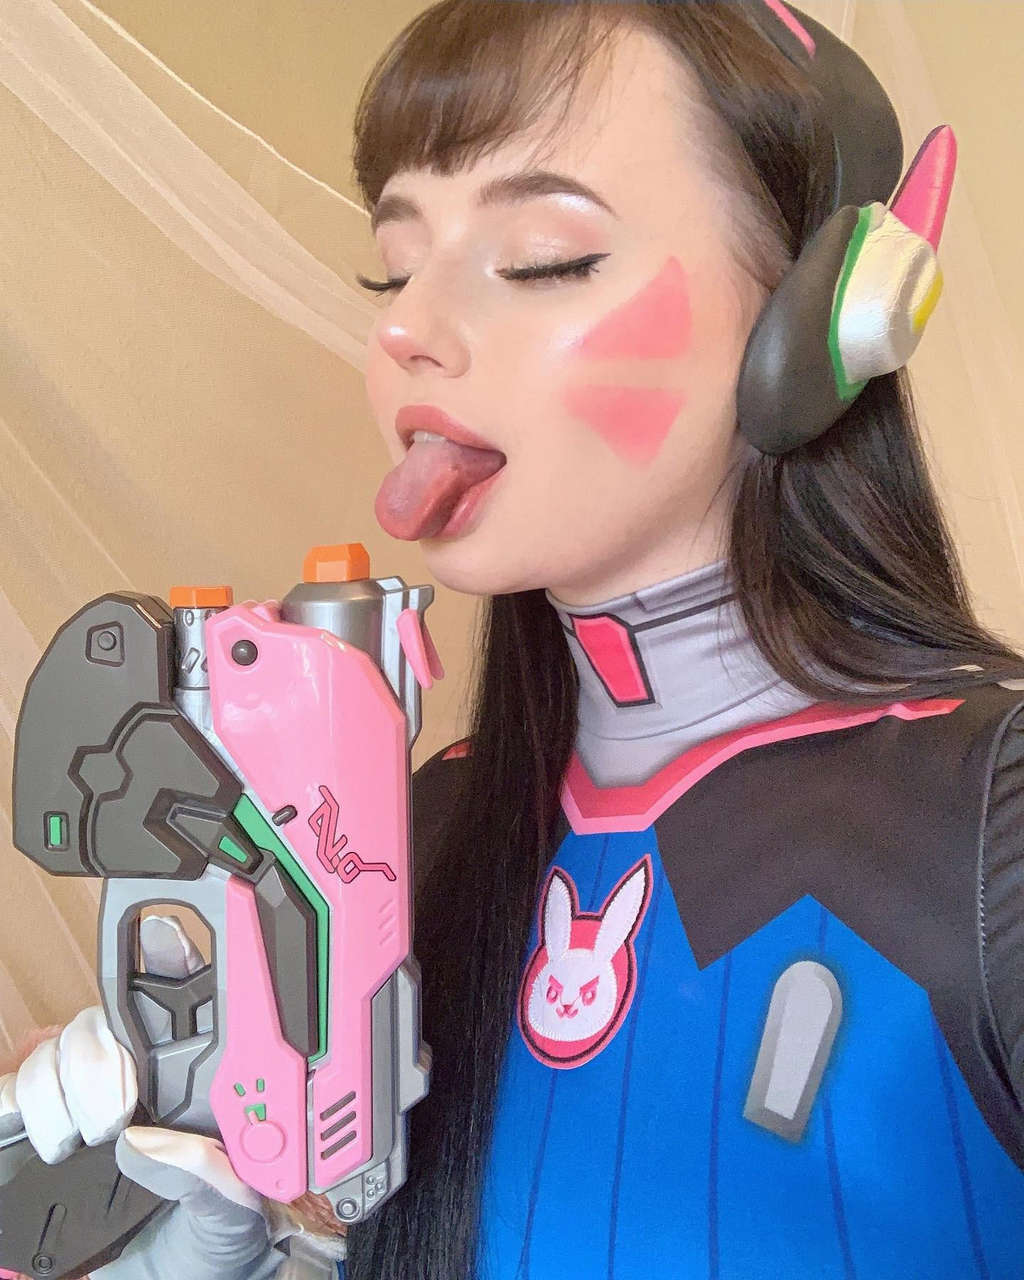 Dva Full Pics Are In The Comment